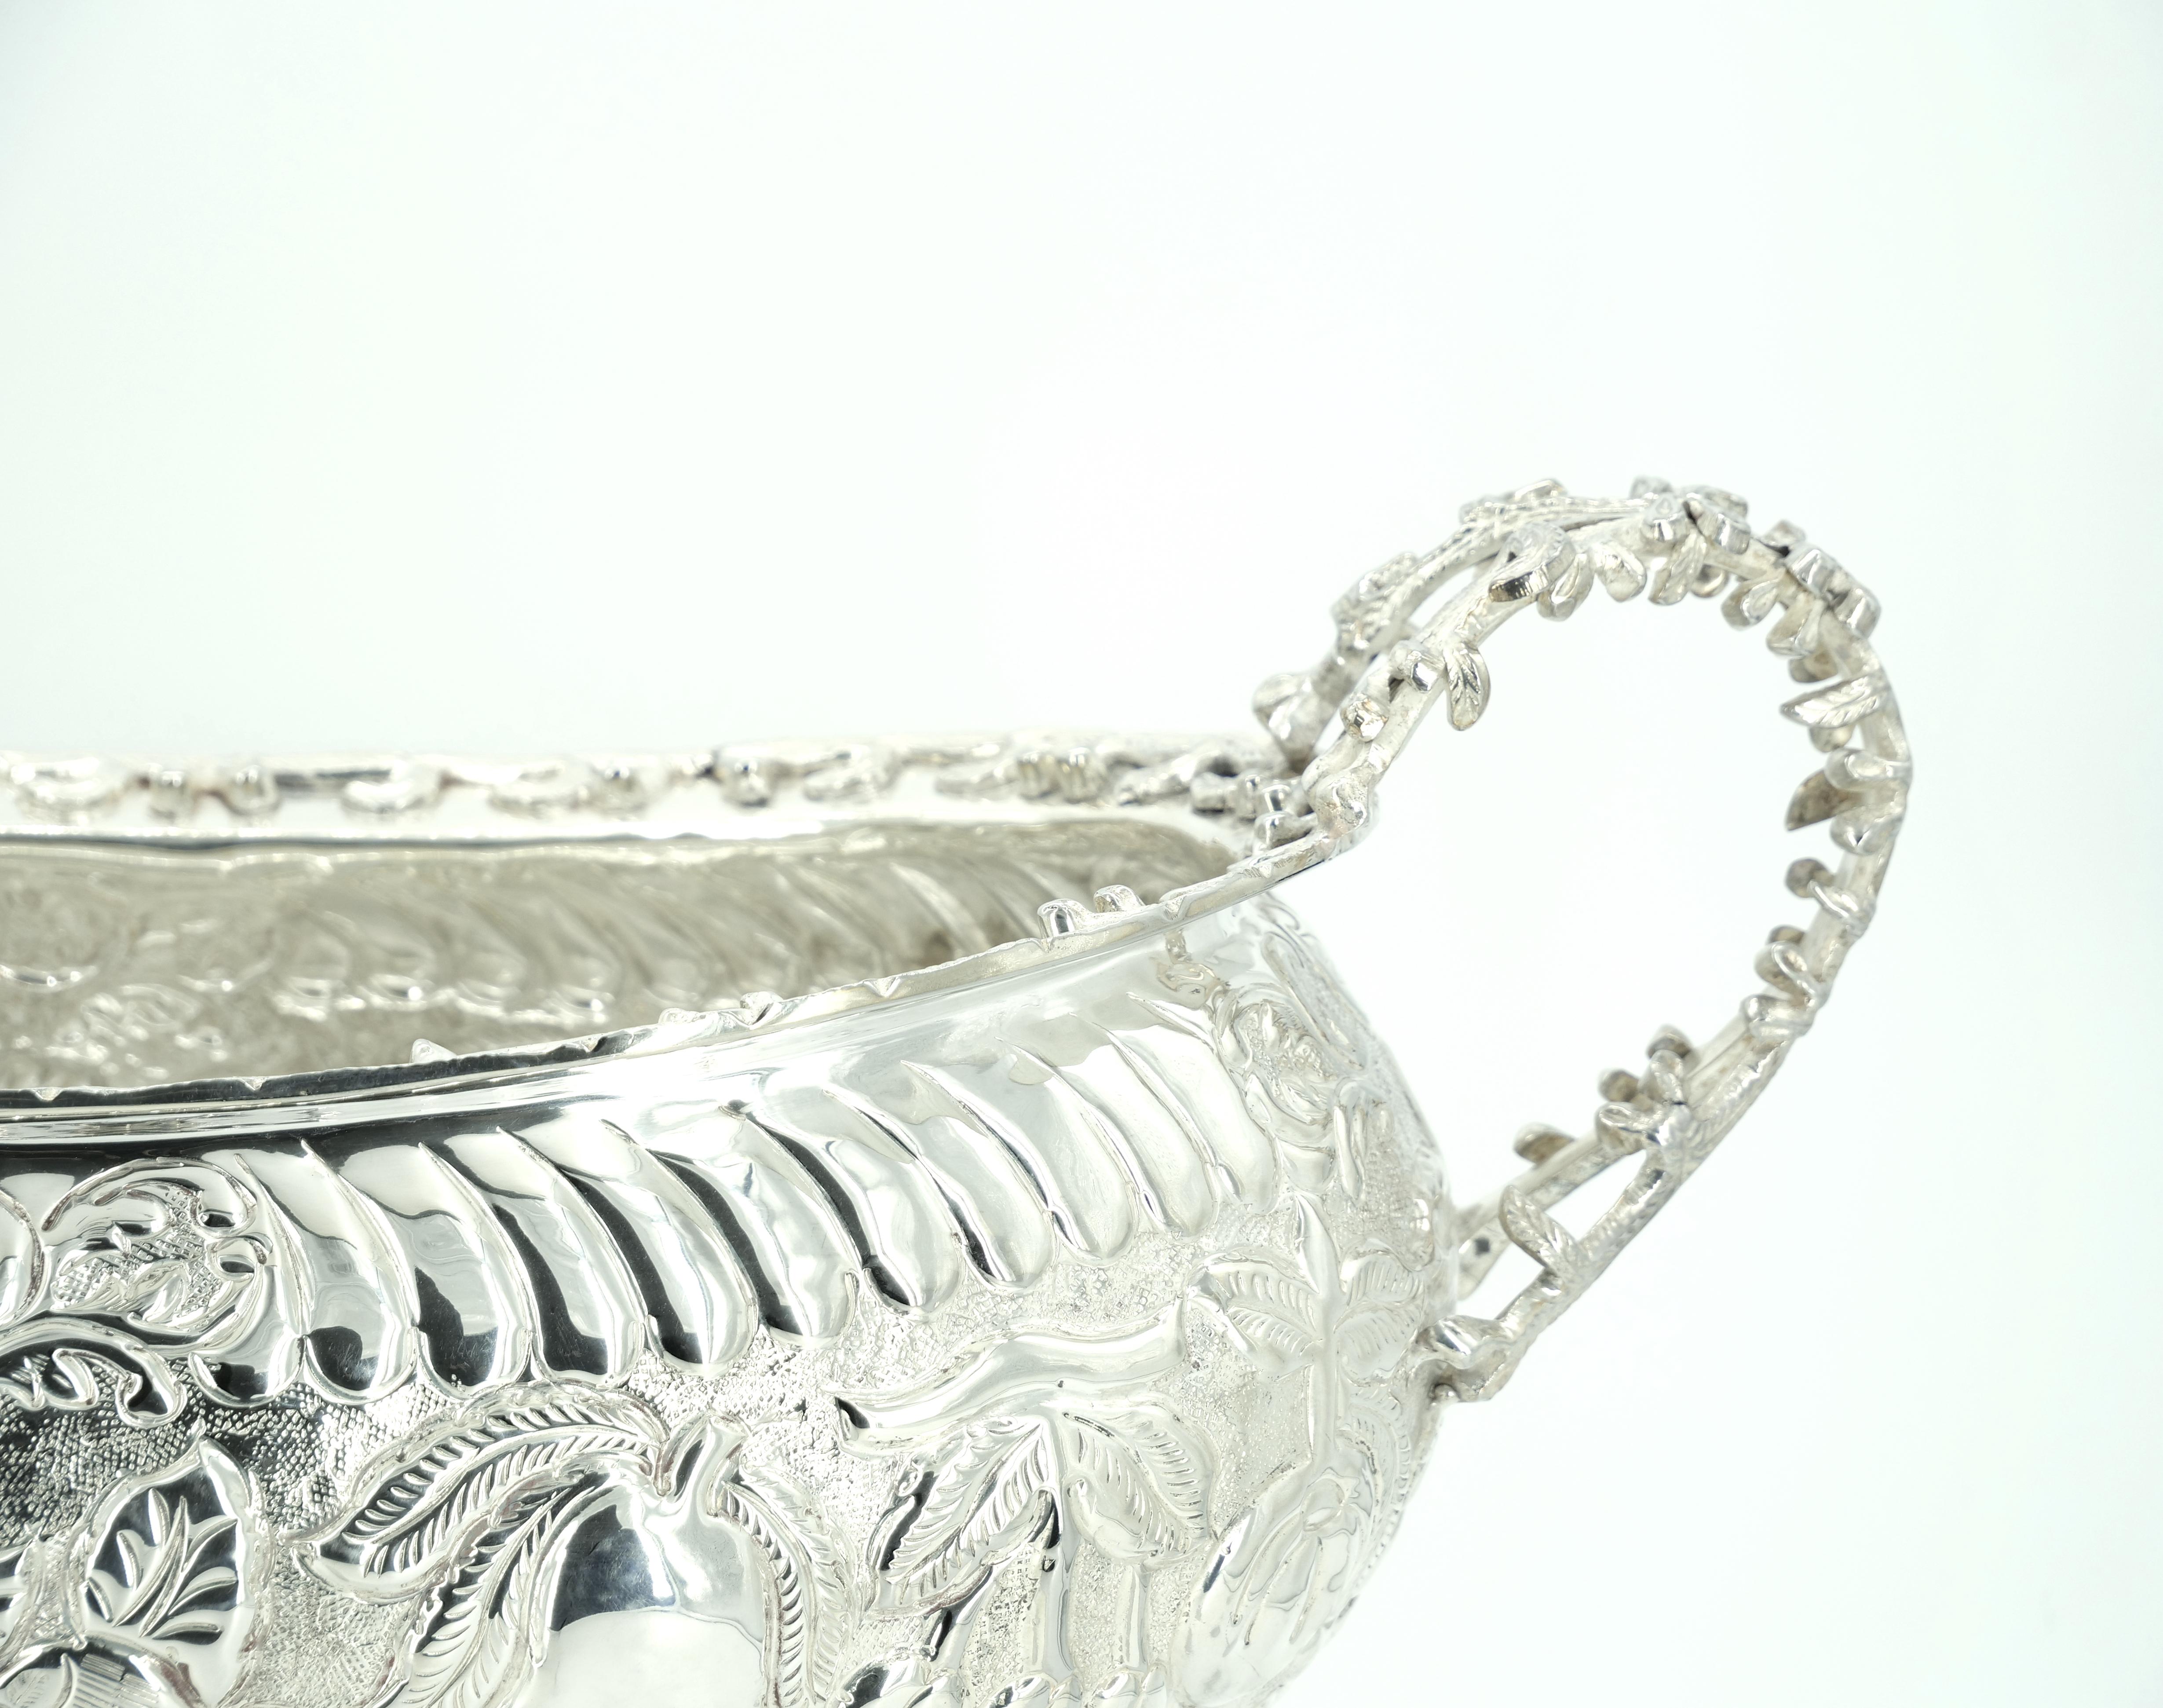 
Indulge in the opulence of our extraordinary large and exquisitely handcrafted Italian silver plate barware champagne cooler and tableware decorative centerpiece. This magnificent piece showcase remarkable craftsmanship and intricate detailing